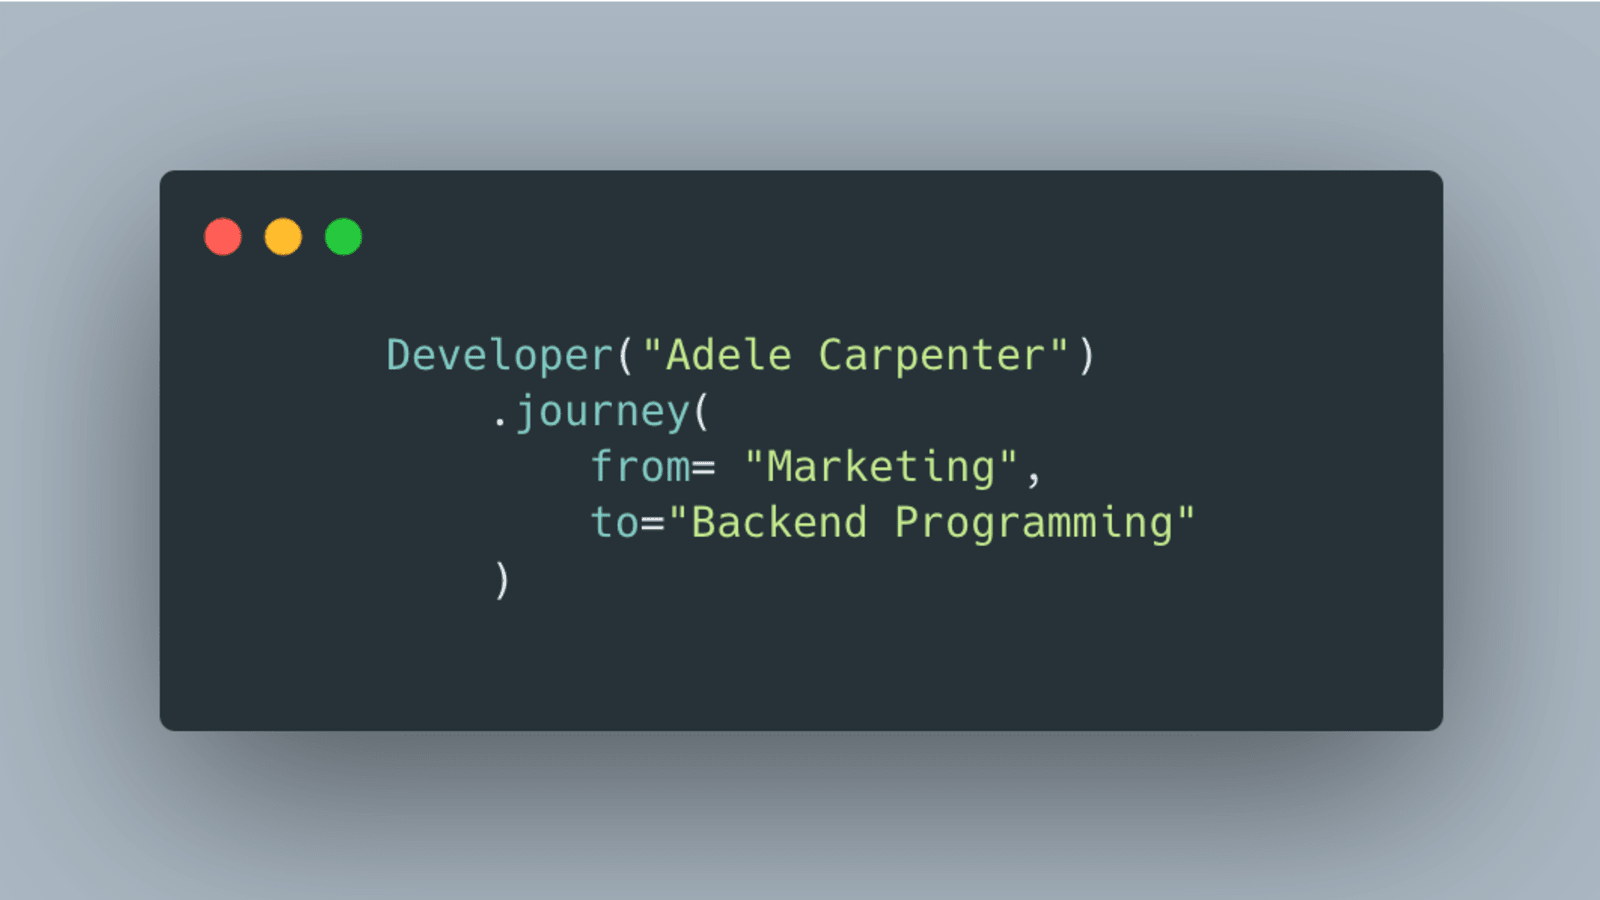 From marketing to backend developer in one year story of Adele Carpenter